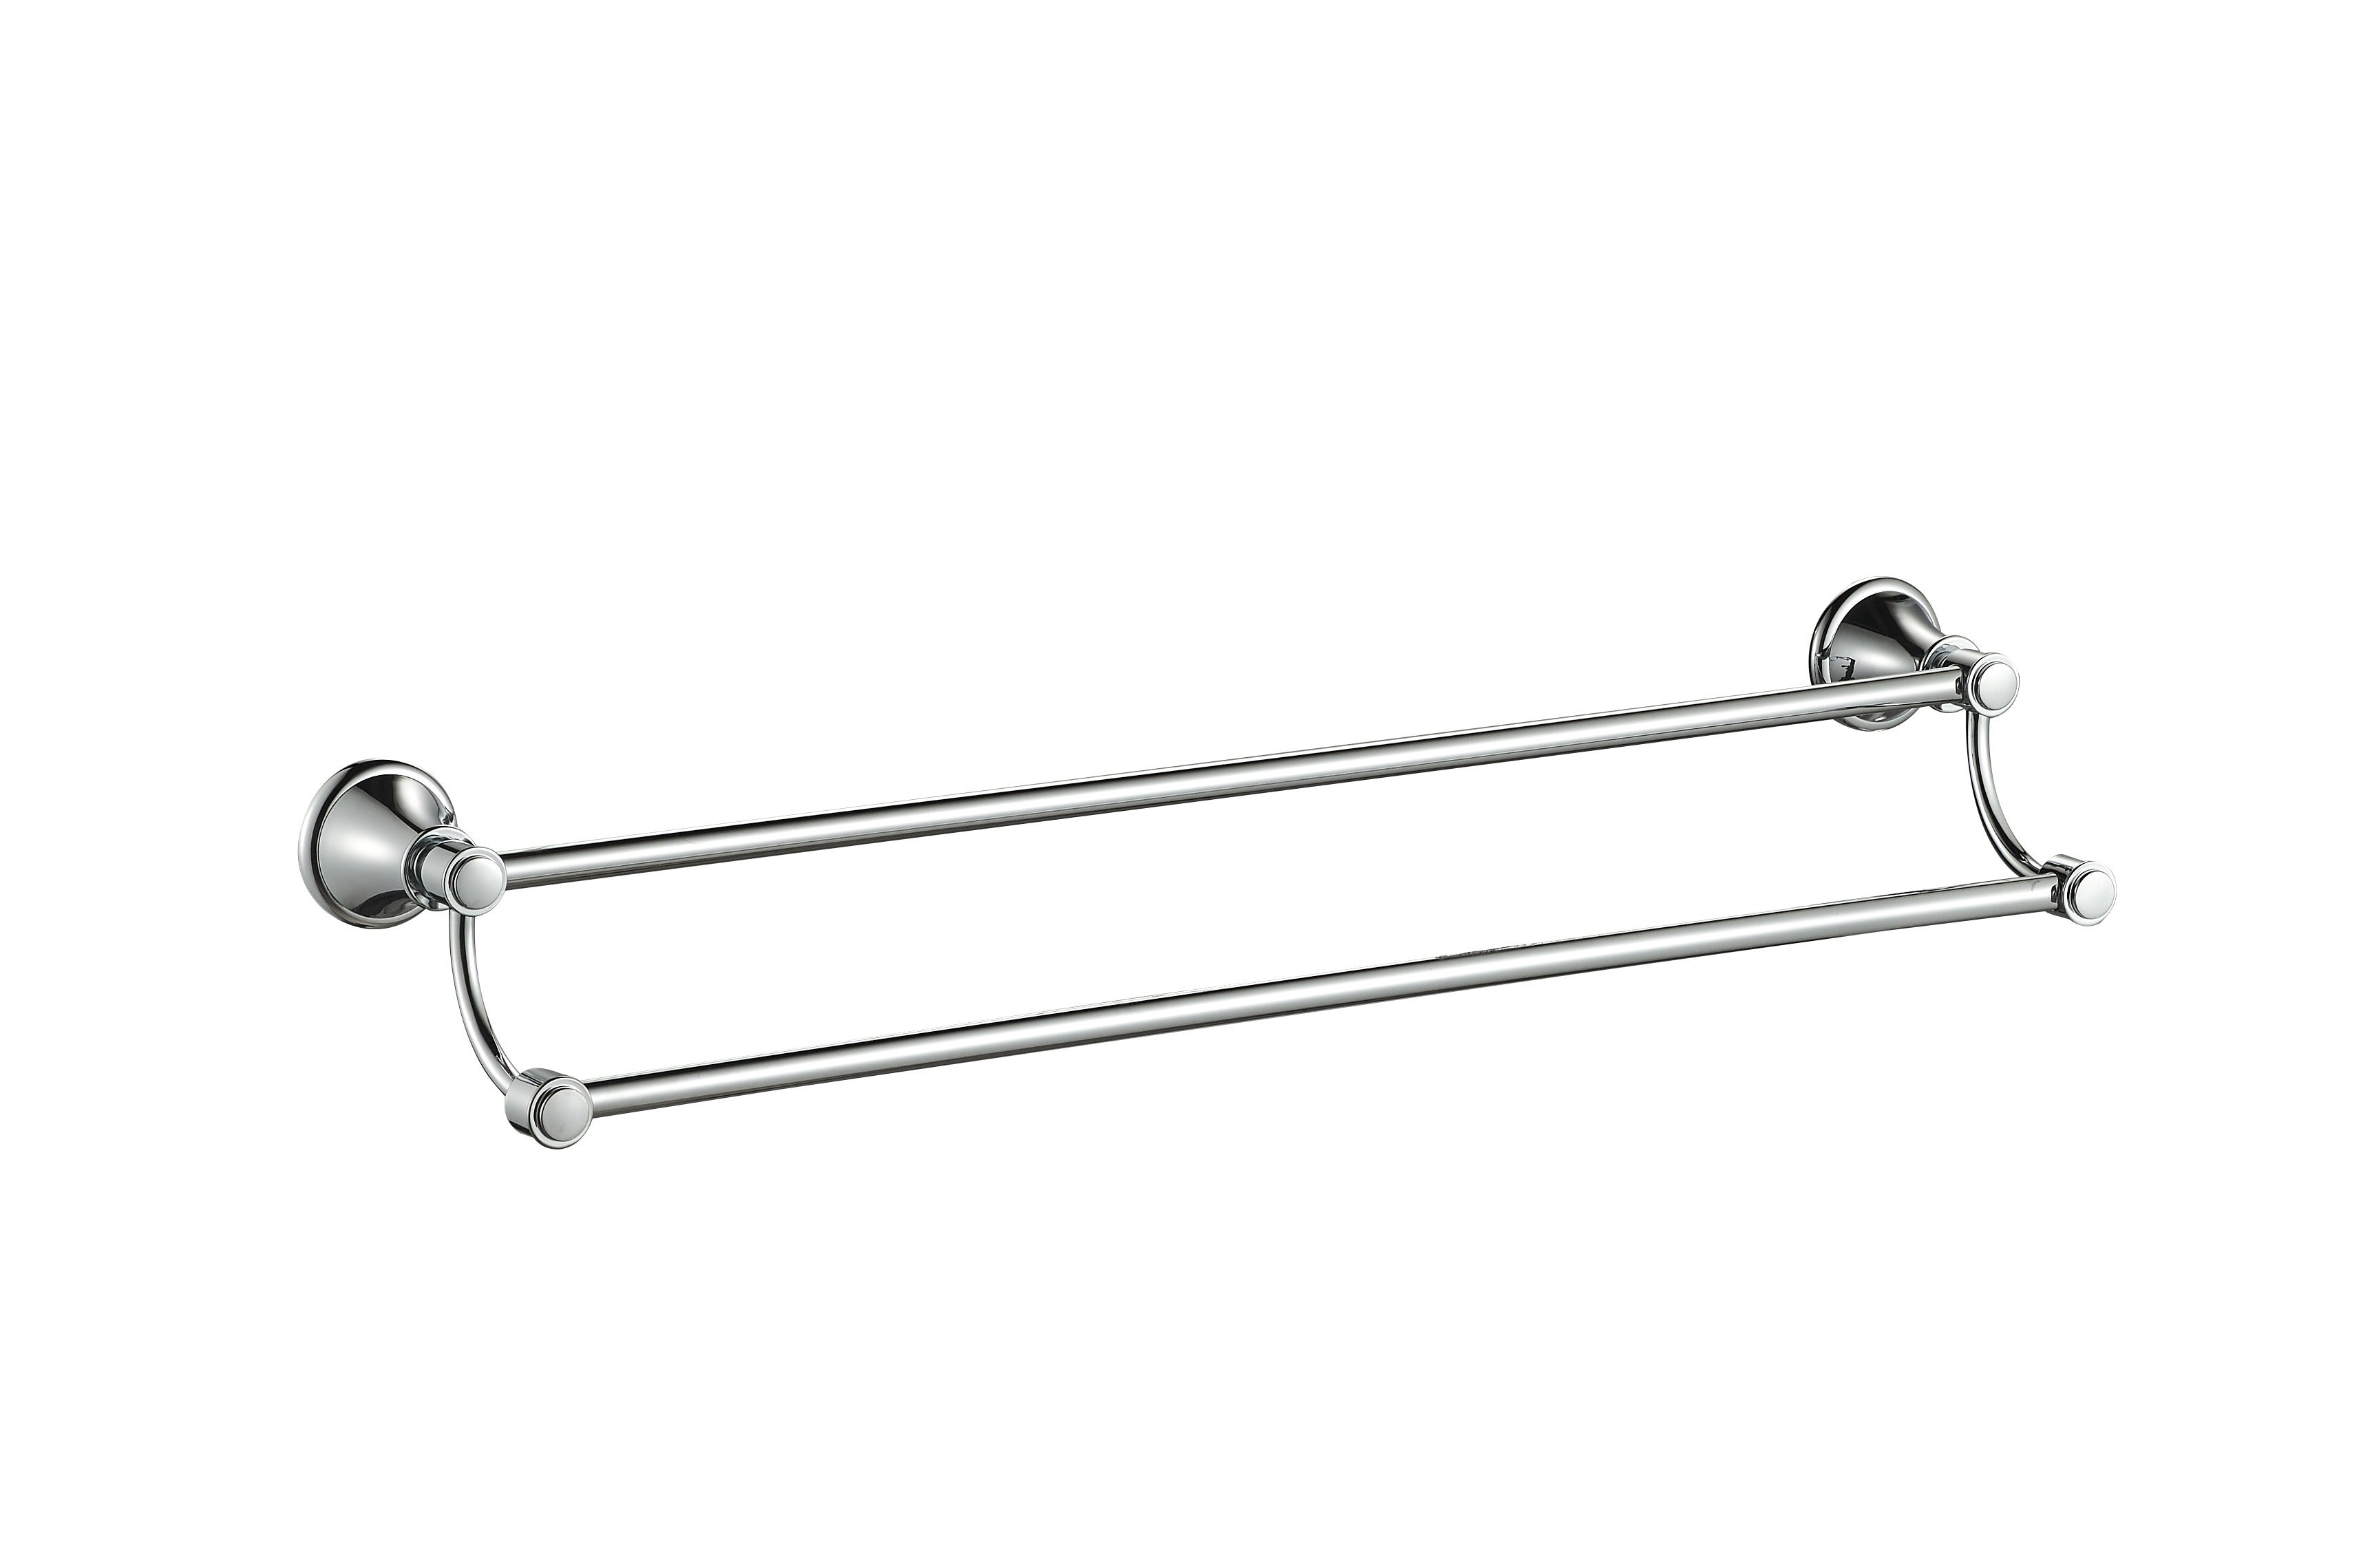 IKON CLASICO NON-HEATED DOUBLE TOWEL RAIL BRUSHED NICKEL 600MM